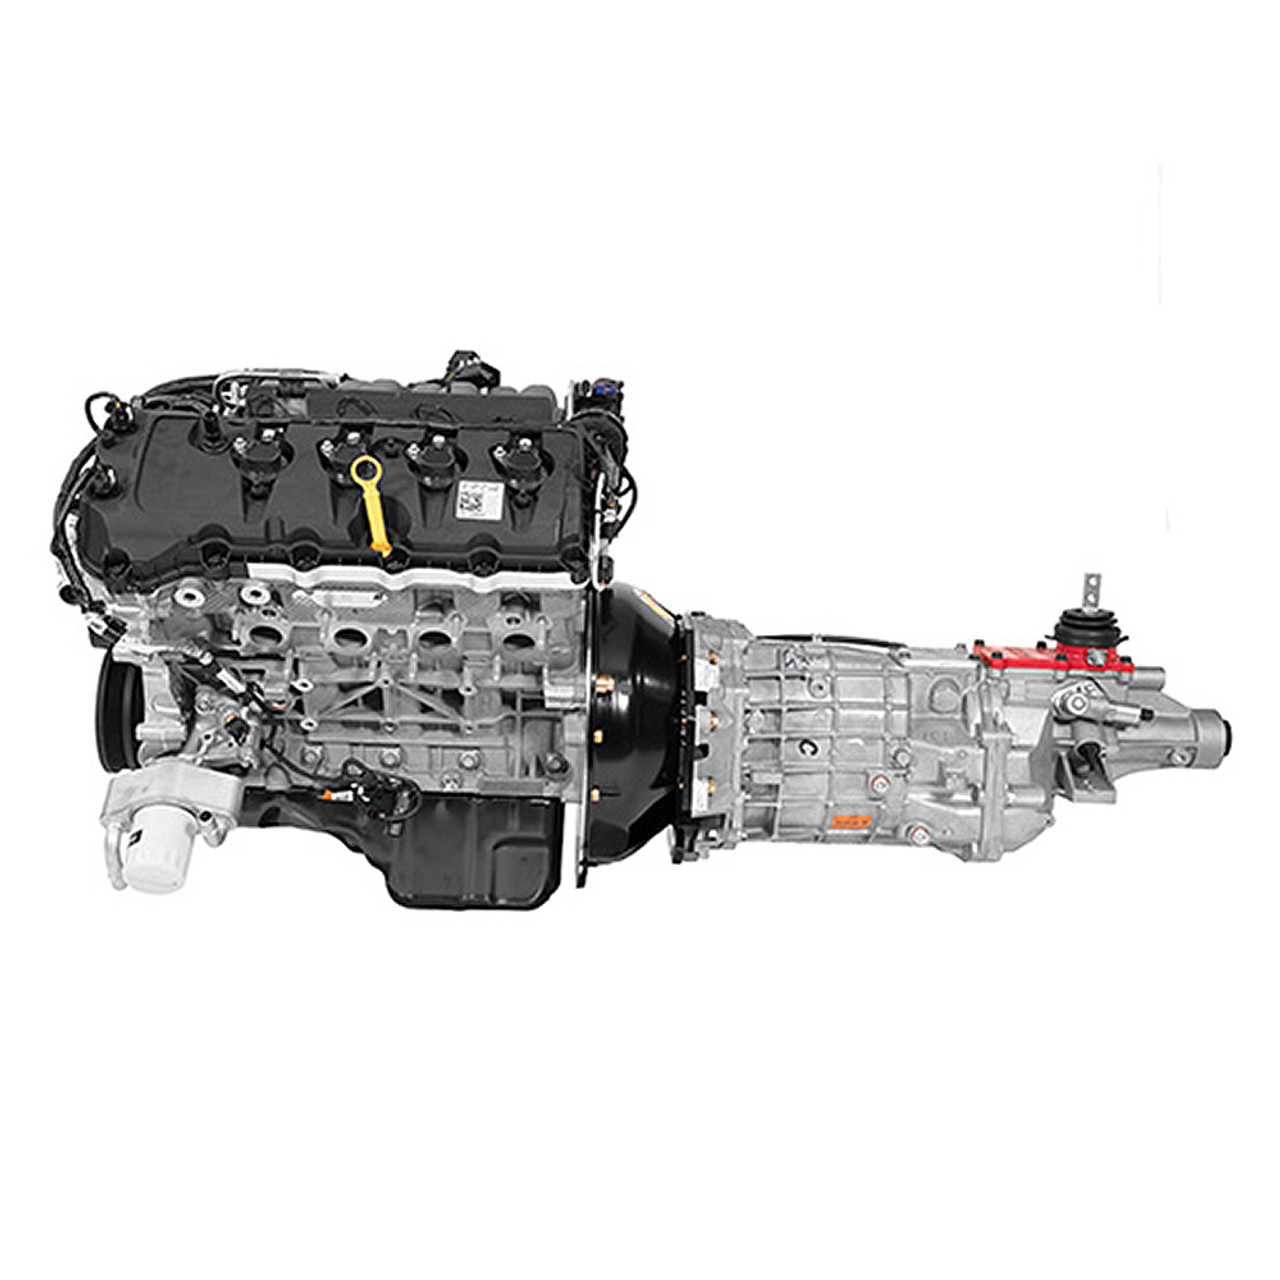 Coyote Engine And Automatic Transmission - The Citrus Report